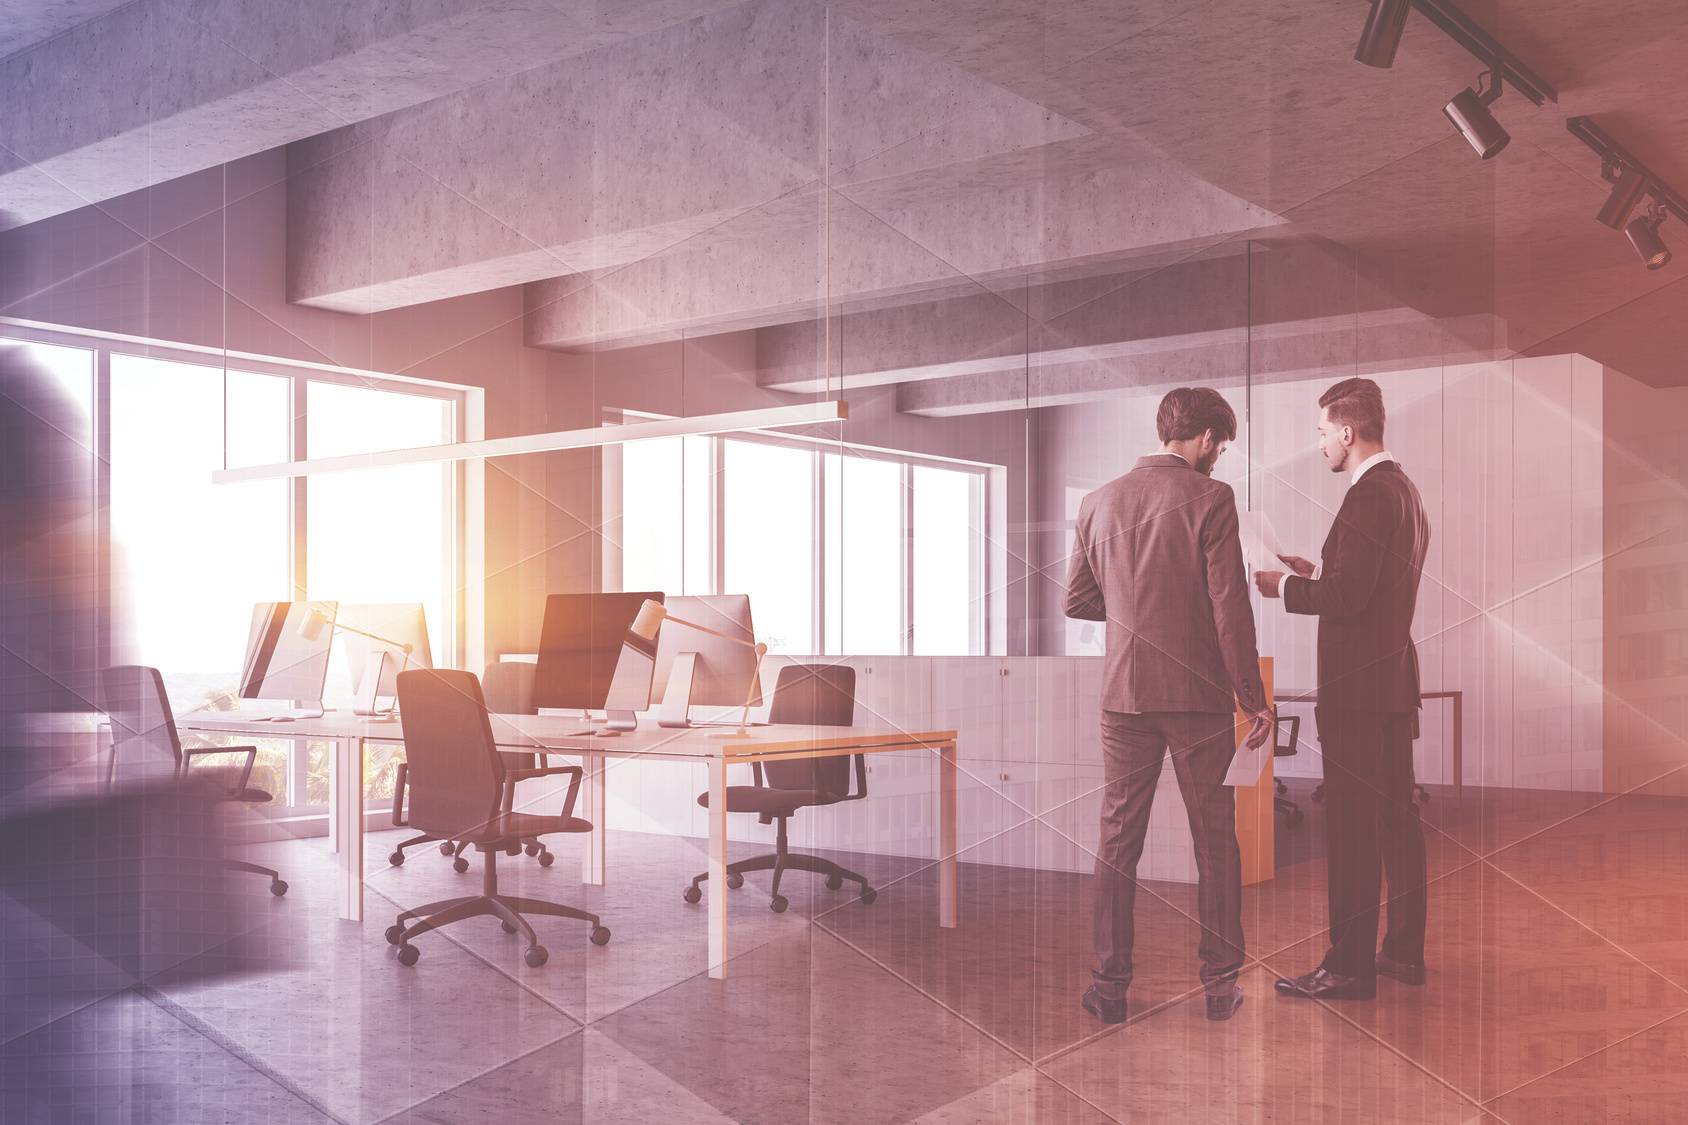 Business people discussing documents in industrial style office with white walls, concrete ceiling and row of white computer desks and file cabinets. Toned image double exposure blurred